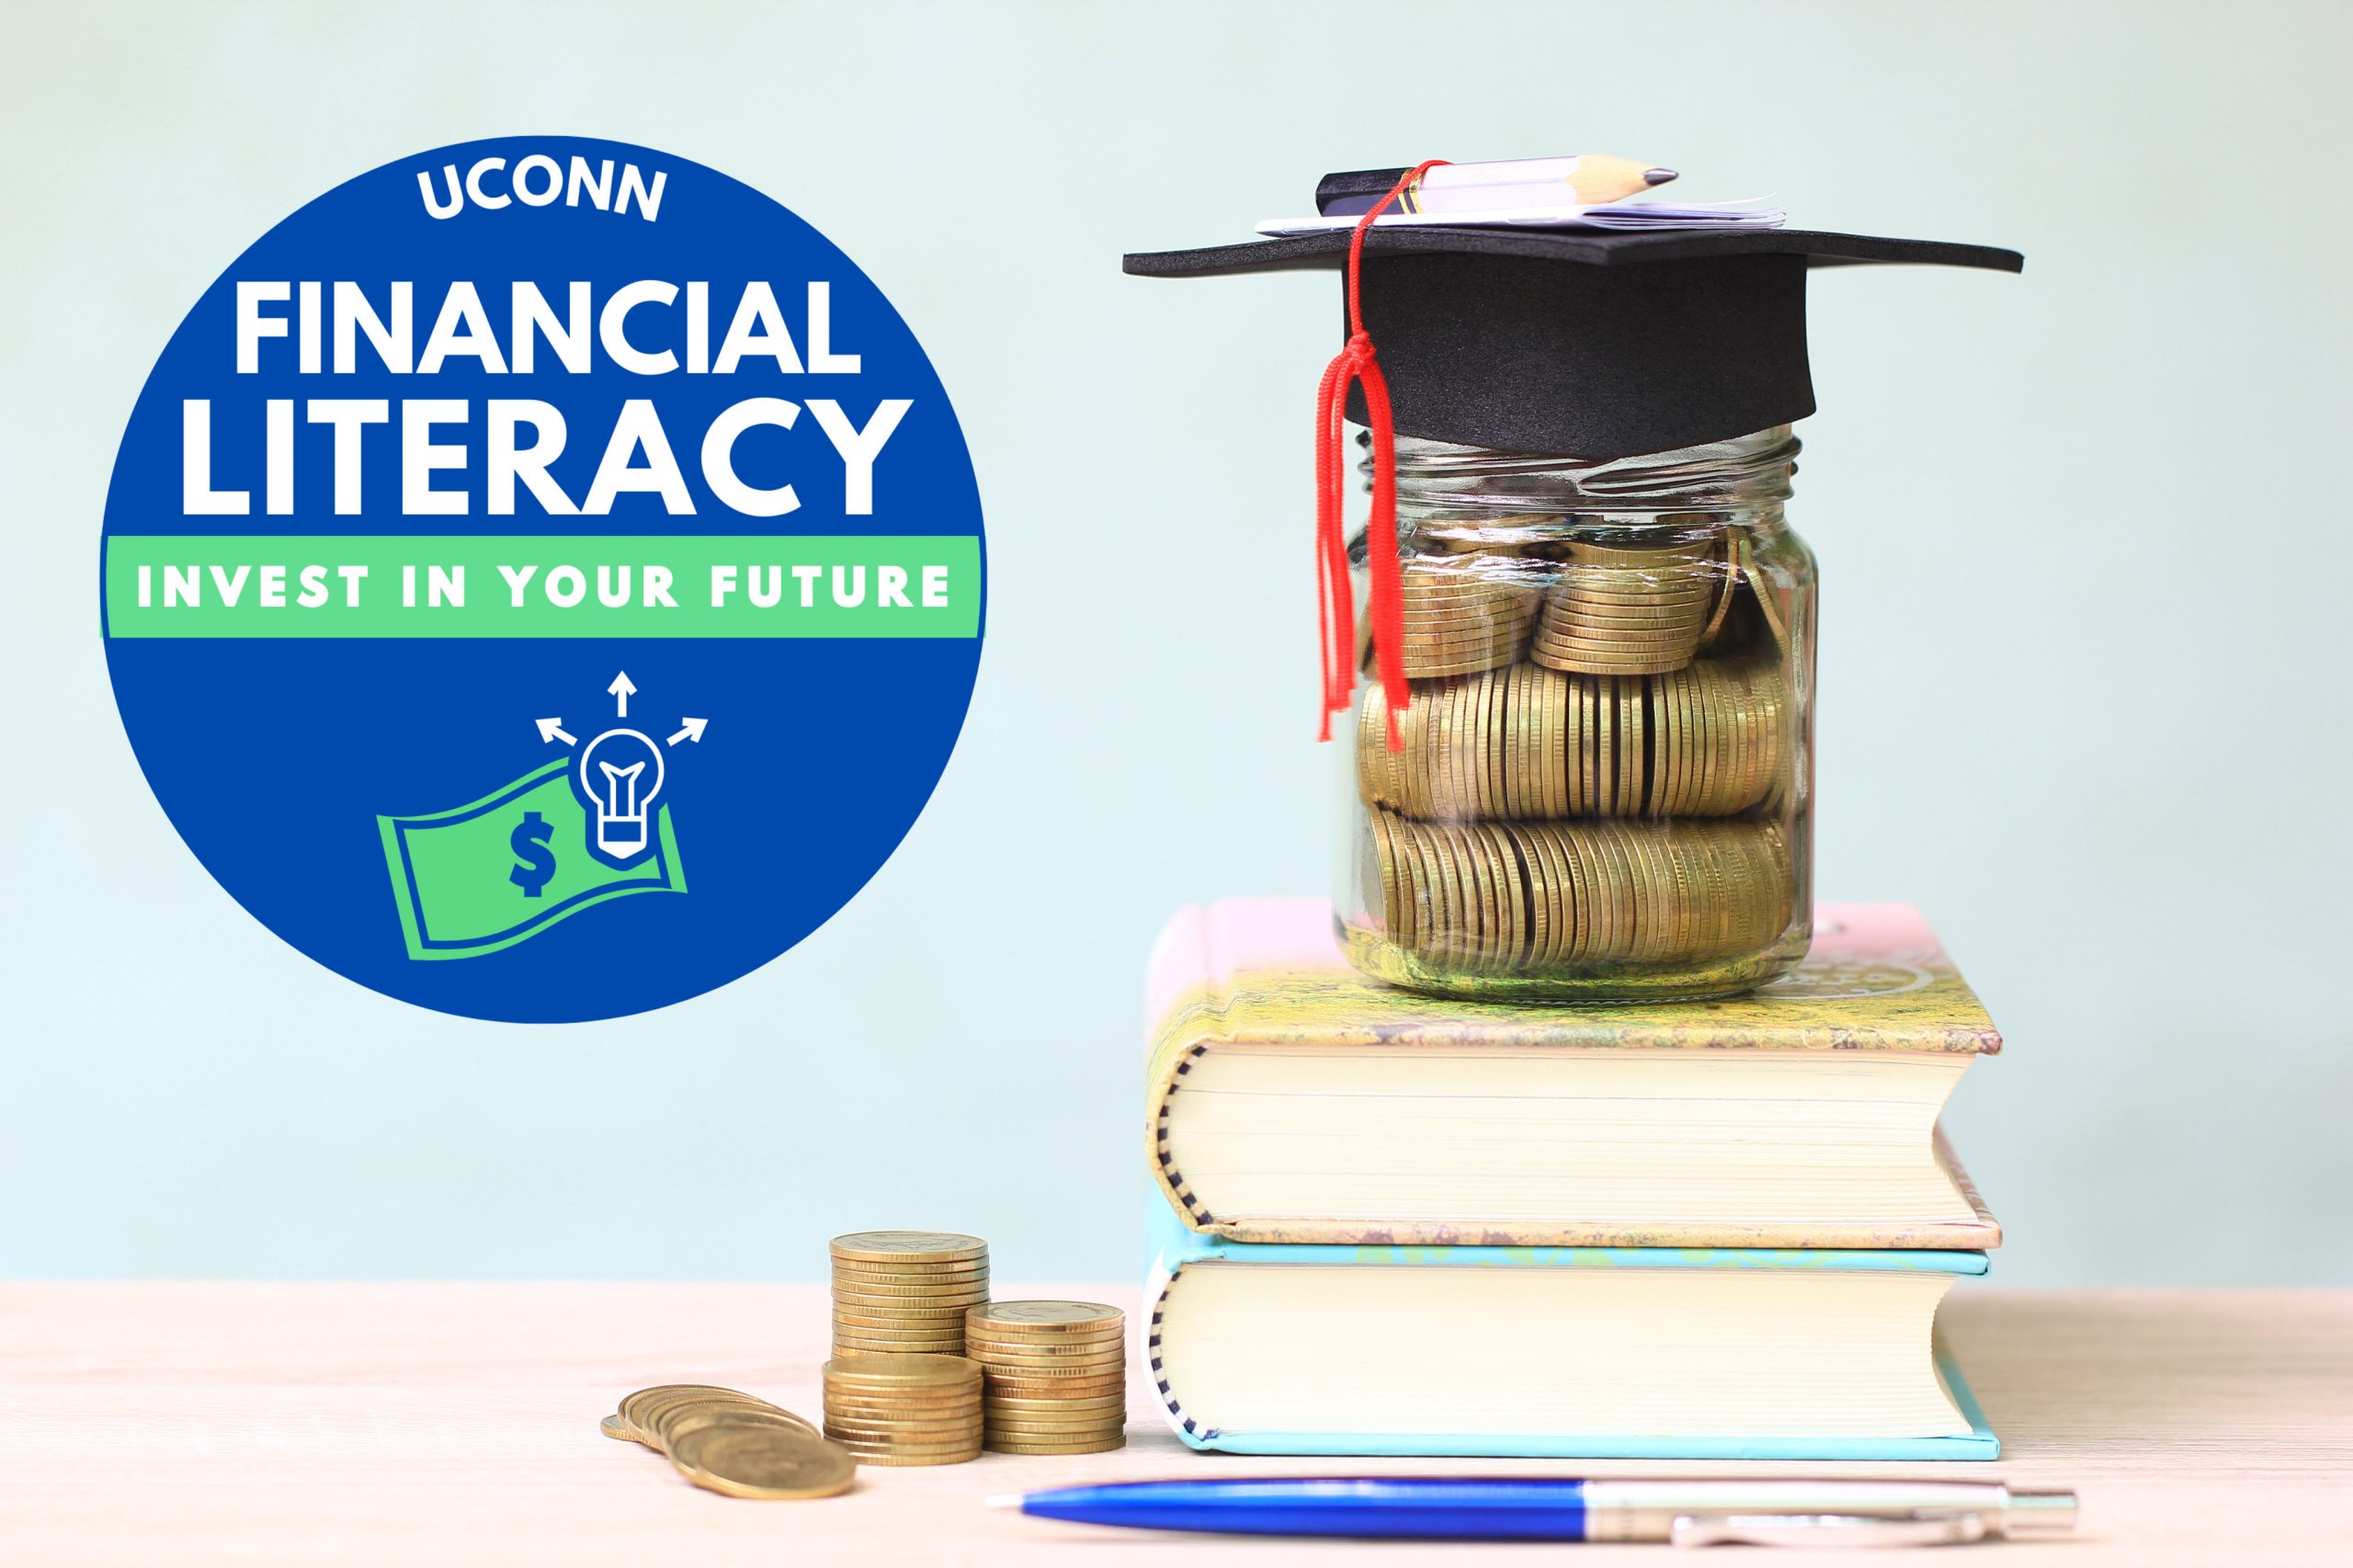 Gaining Familiarity and Finding Fun in Financial Literacy - UConn Today